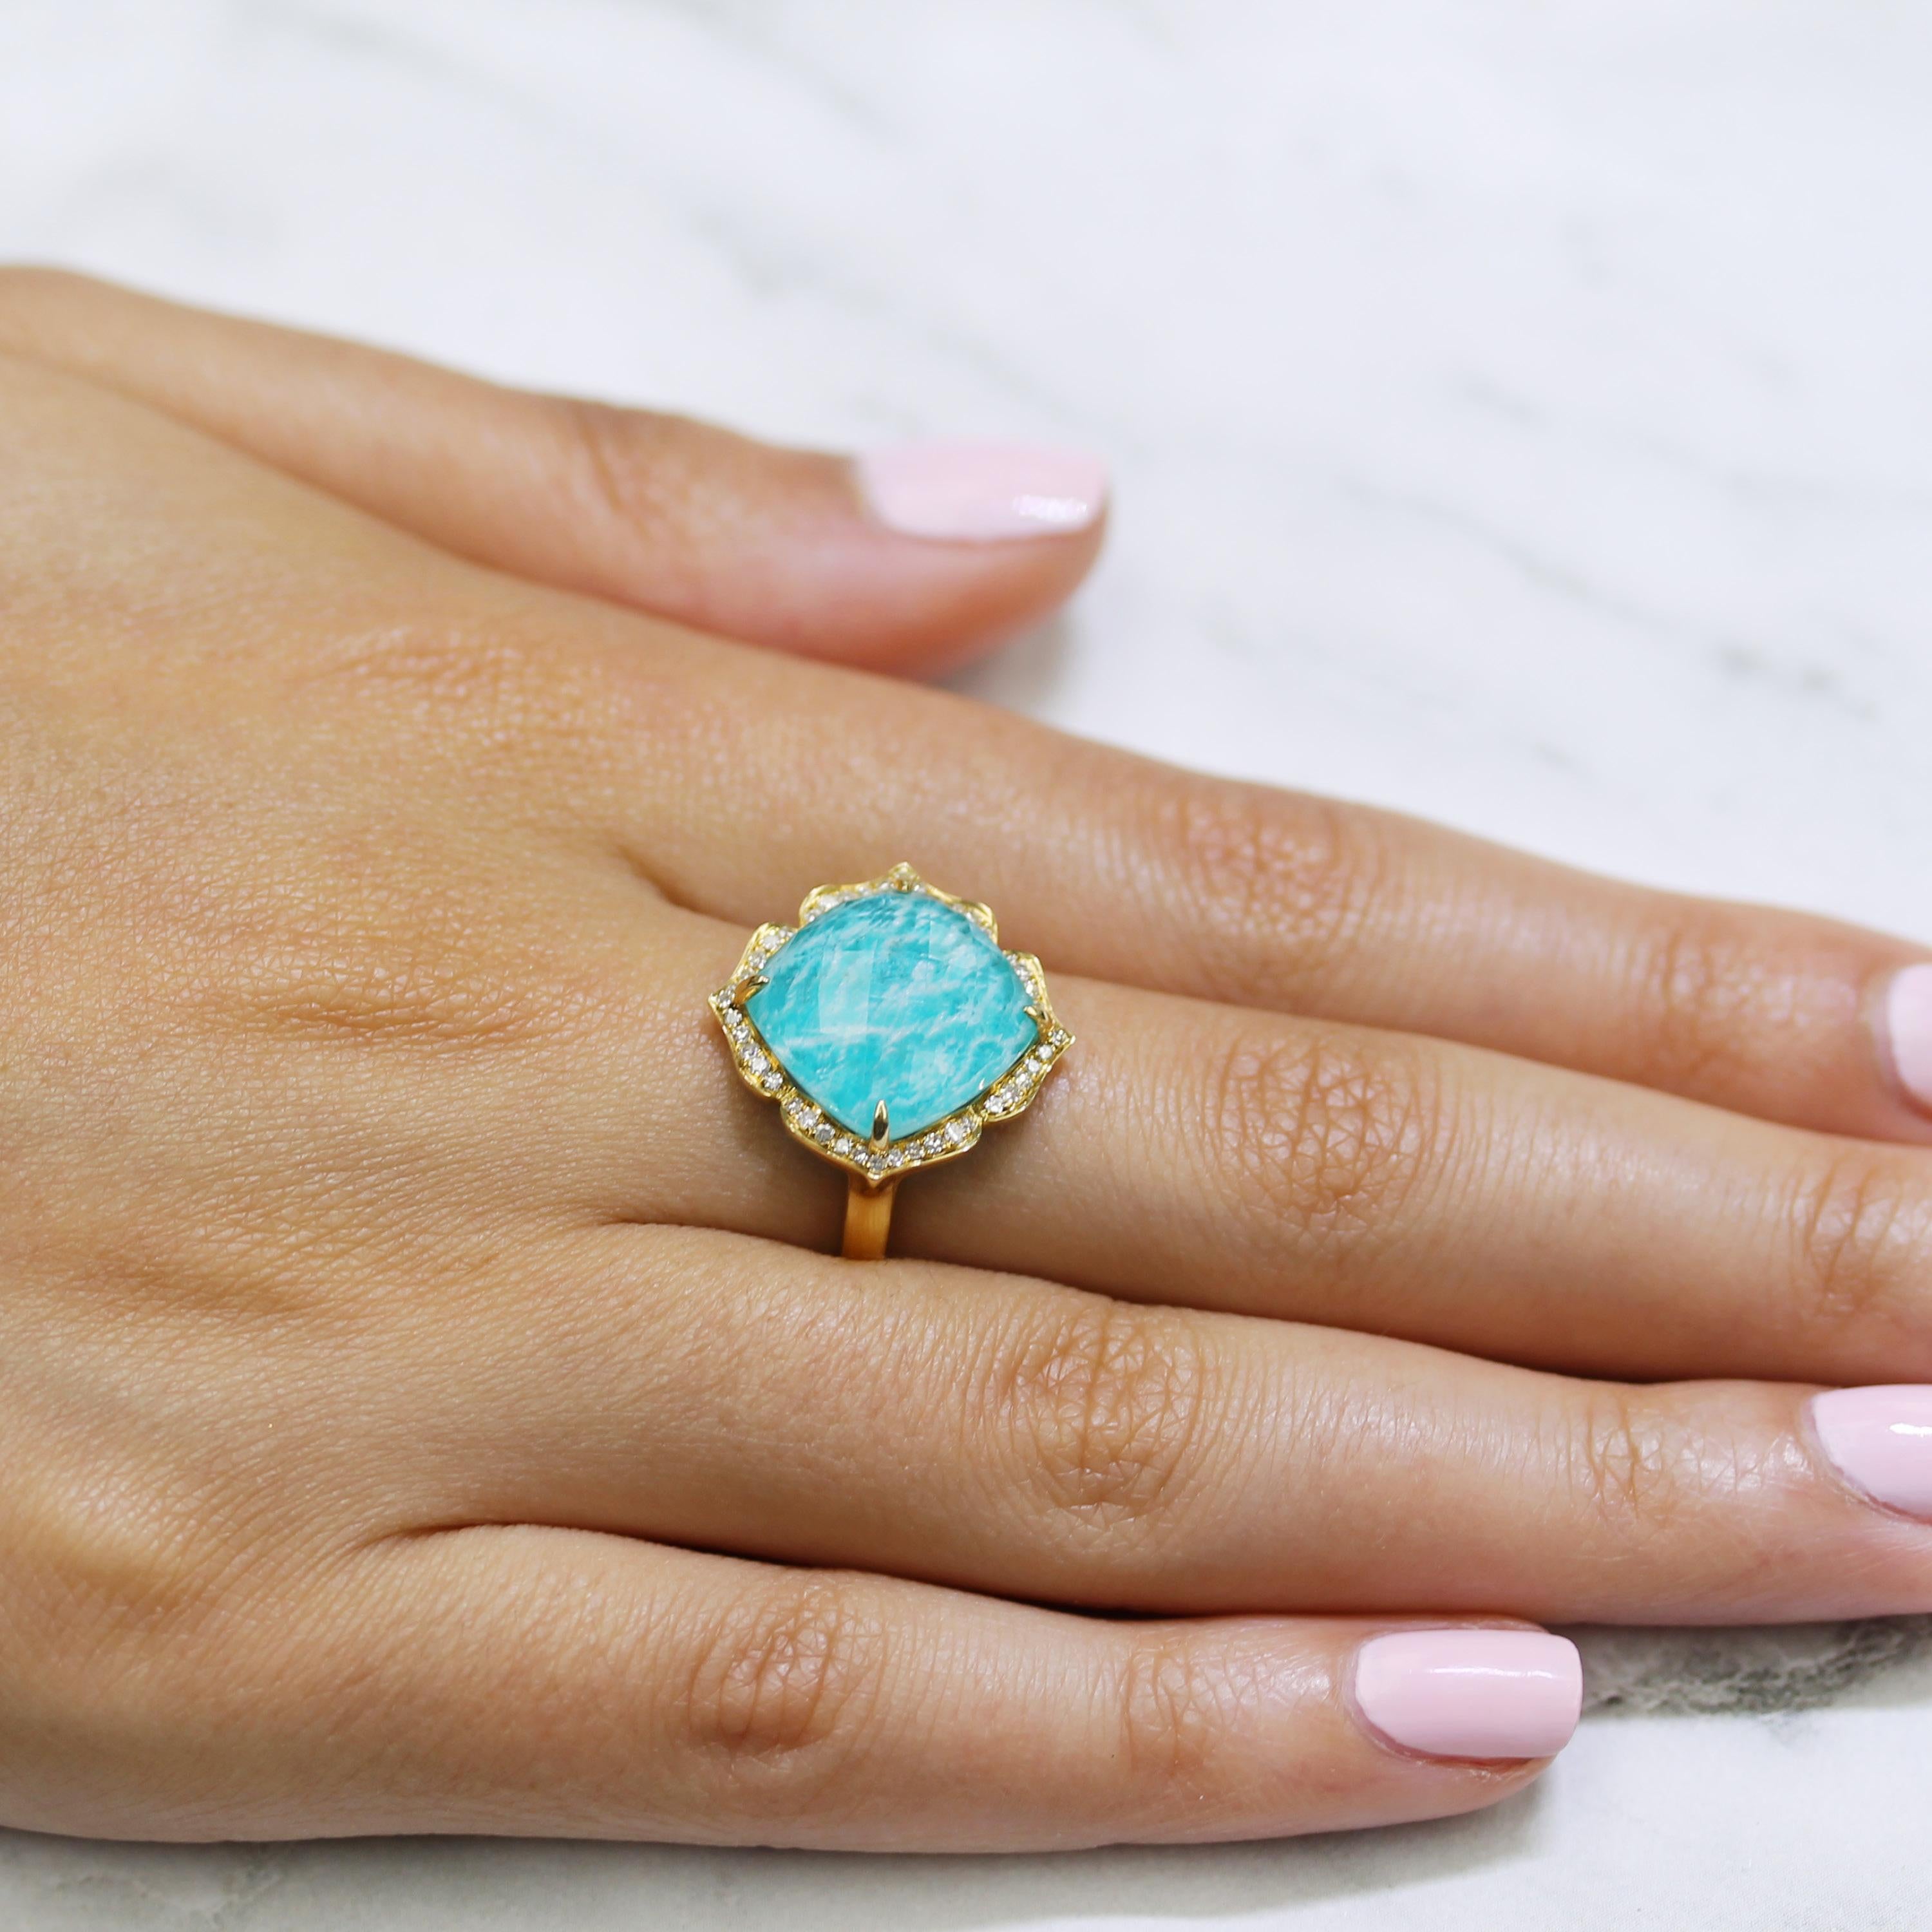 18K Yellow Gold Ring featuring a doublet of Cushion-Cut White Quartz layered with Amazonite, and Diamond Halo. Flower shape setting is a perfect look for spring and summer. Finger size 6.5, adjustable upon request/quote. Amazonite, known as 